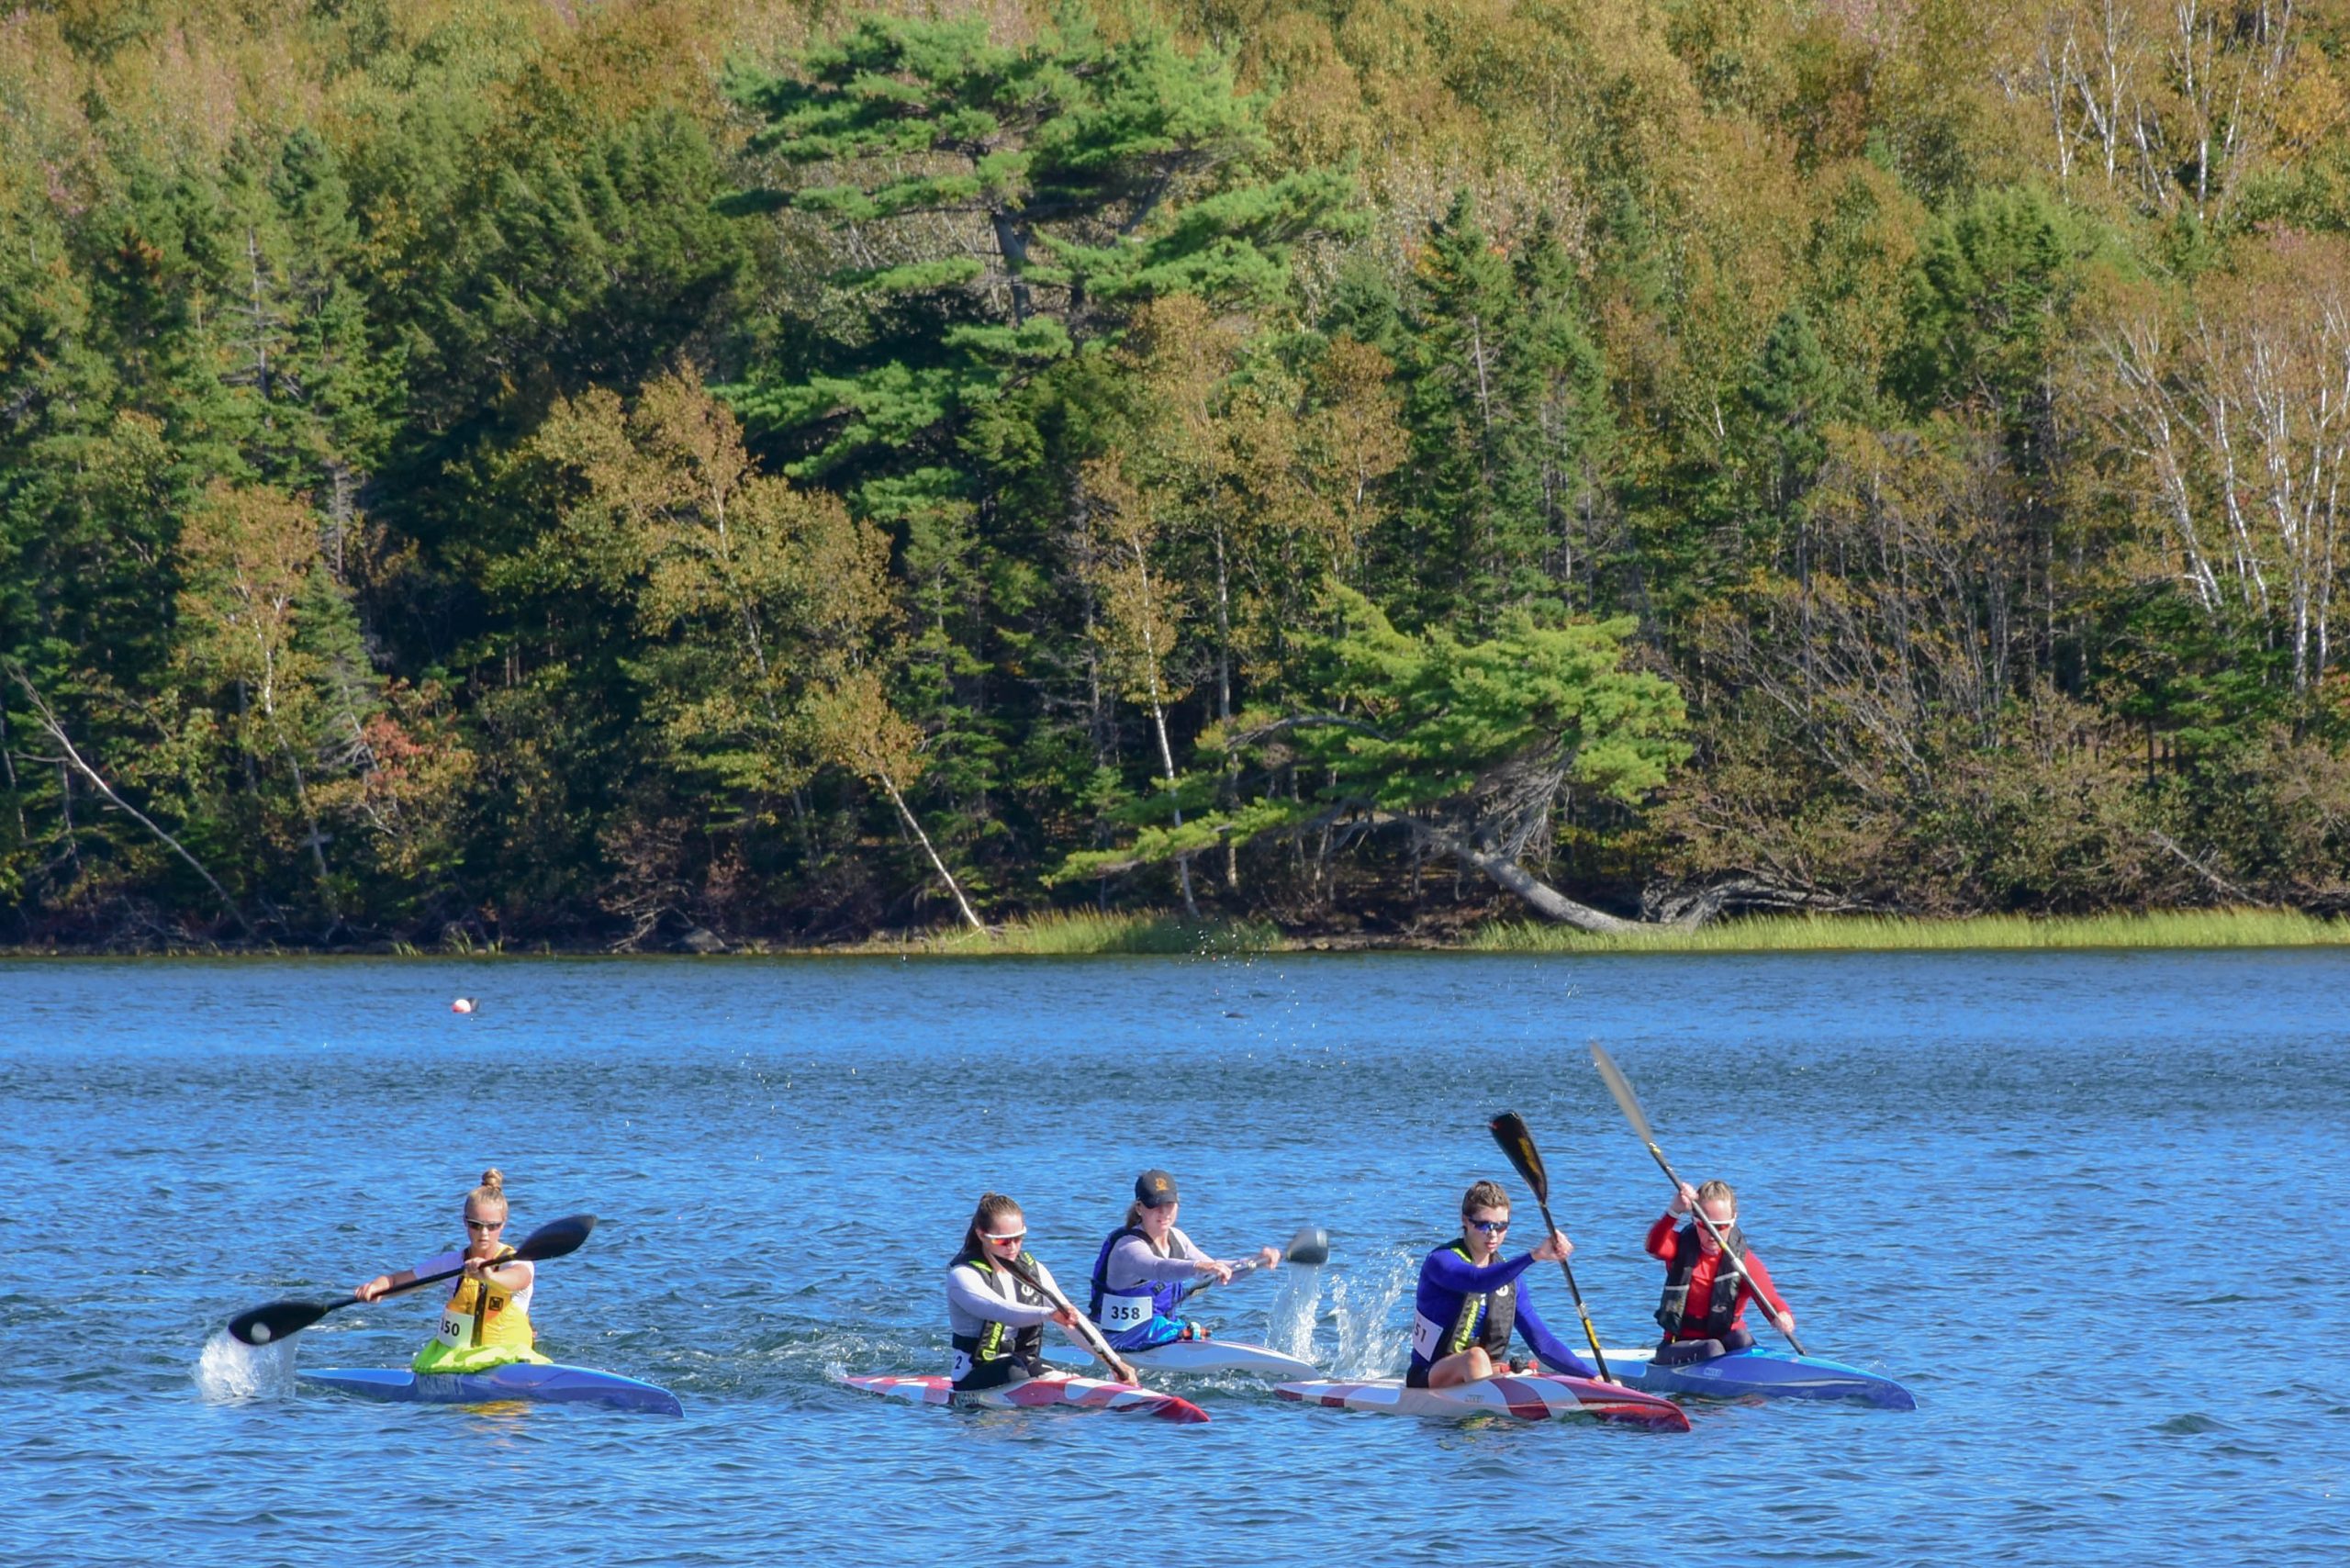 Kayakers on a lake in autumn. Deciduous trees in fall colours on the opposite shore.